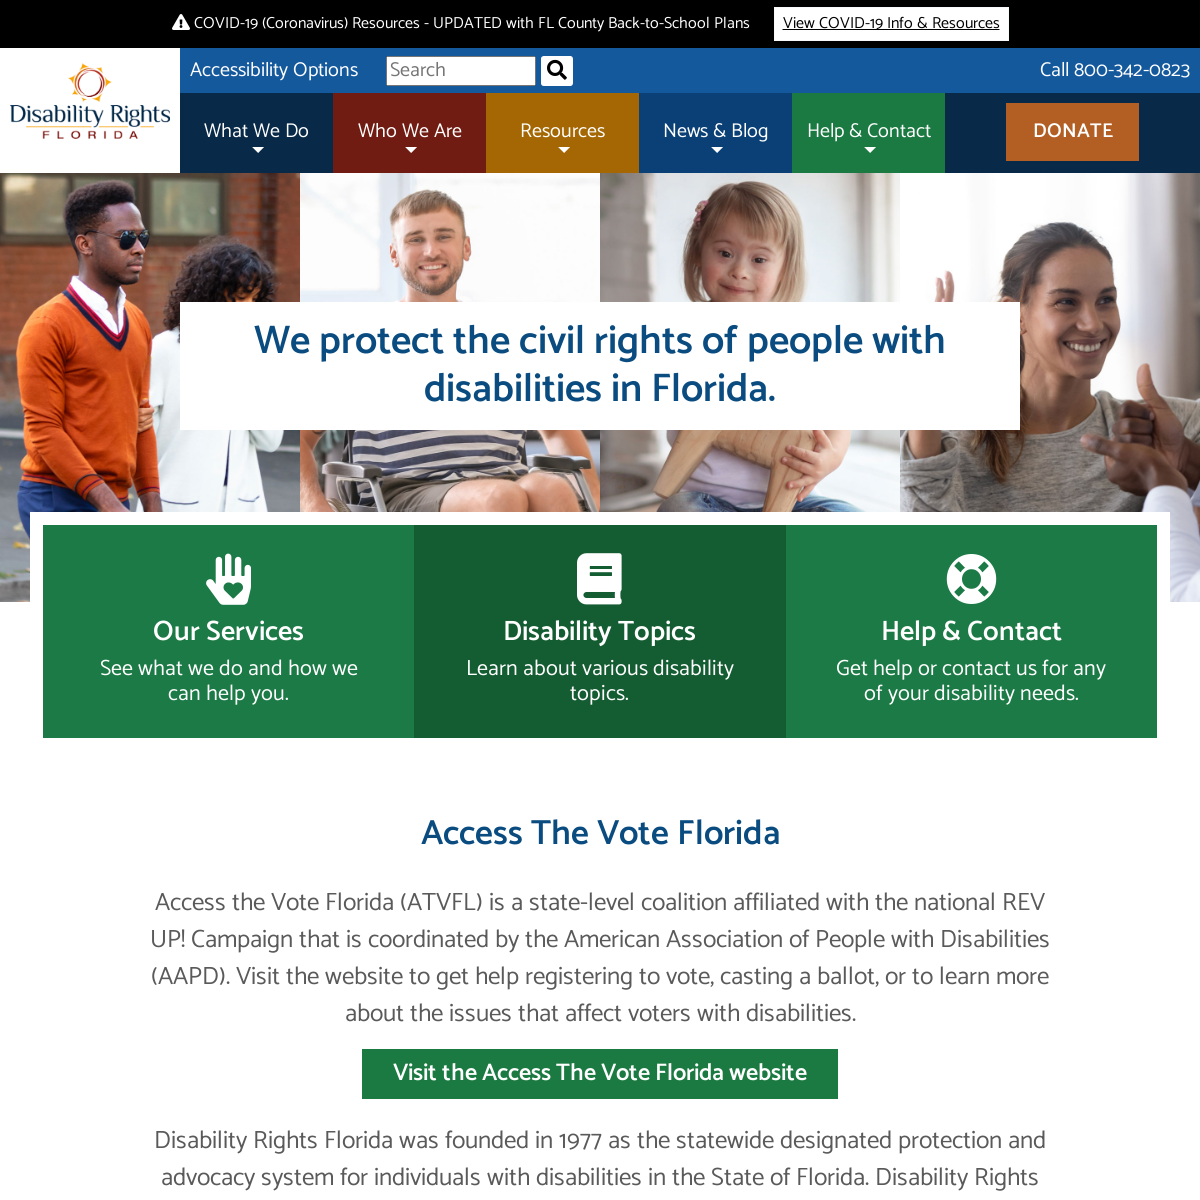 A complete backup of disabilityrightsflorida.org